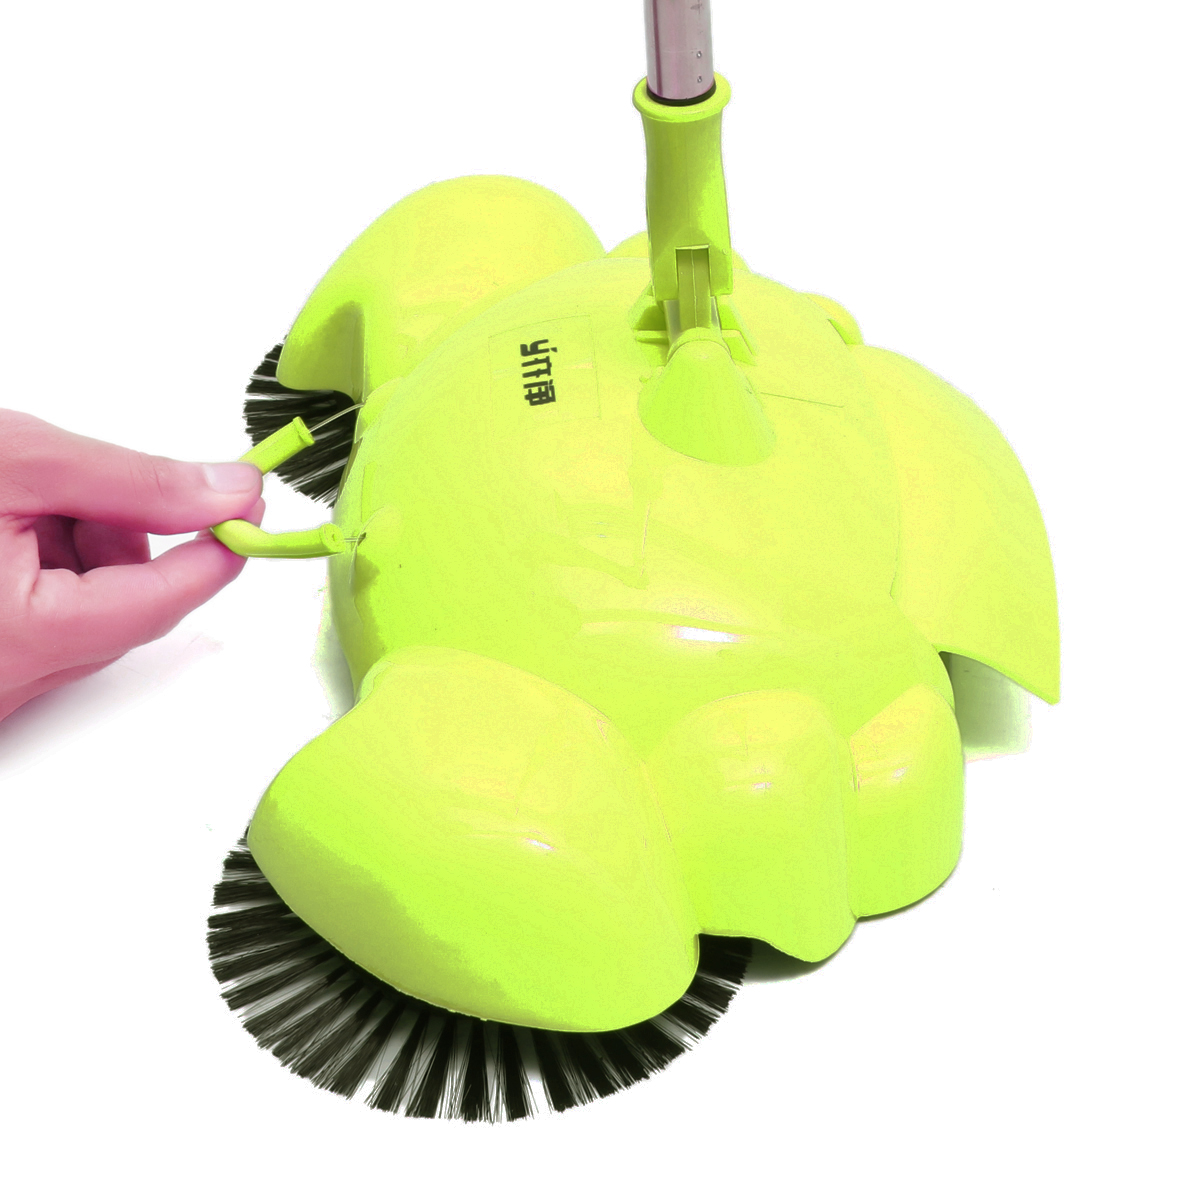 Lazy-Spin-Hand-Push-Sweeper-Broom-Floor-Sweeper-Cleaning-Mop-Without-Electricty-1548113-8